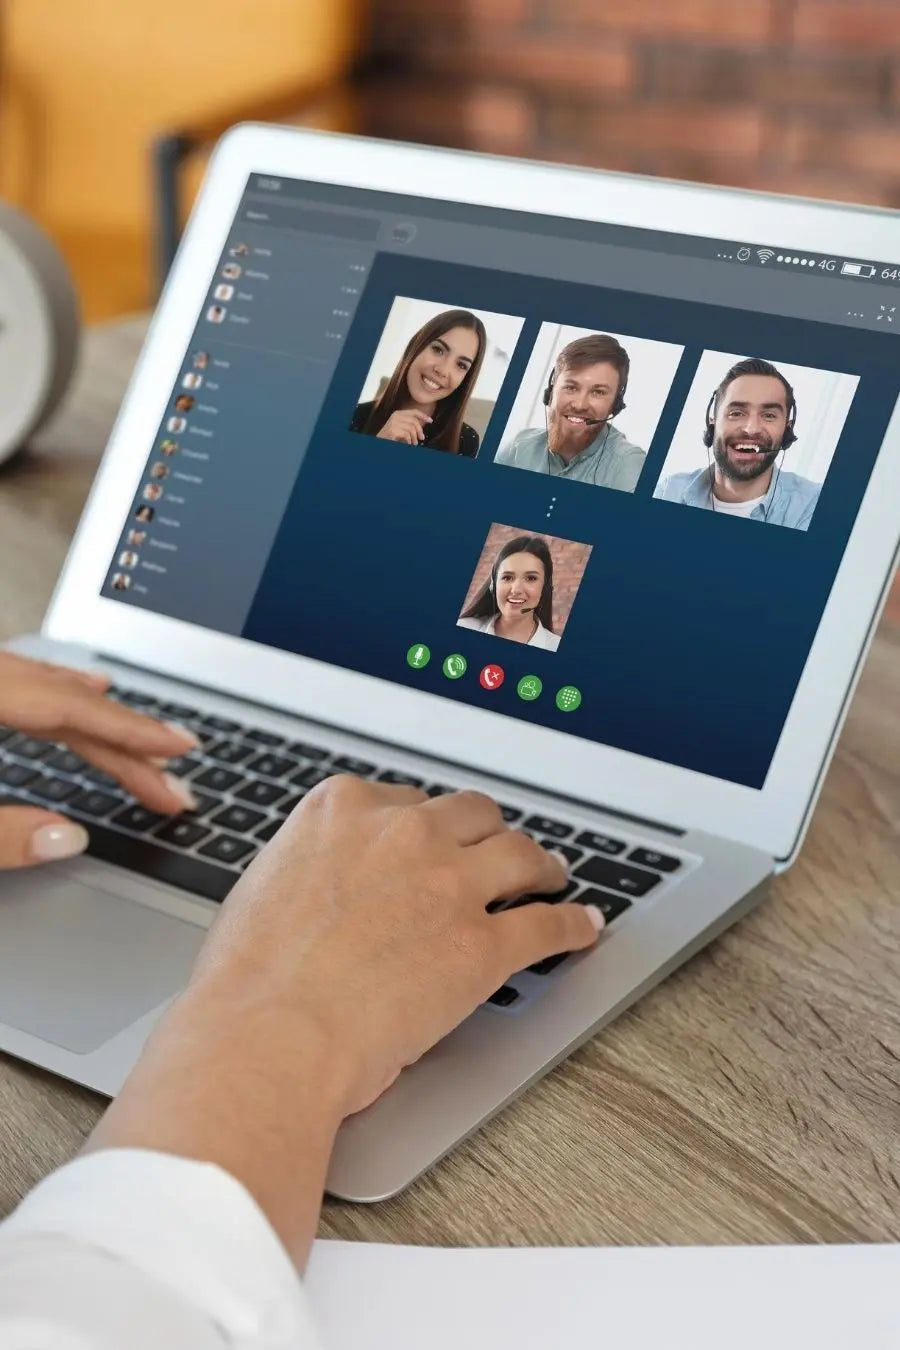 what to keep in mind when video chatting